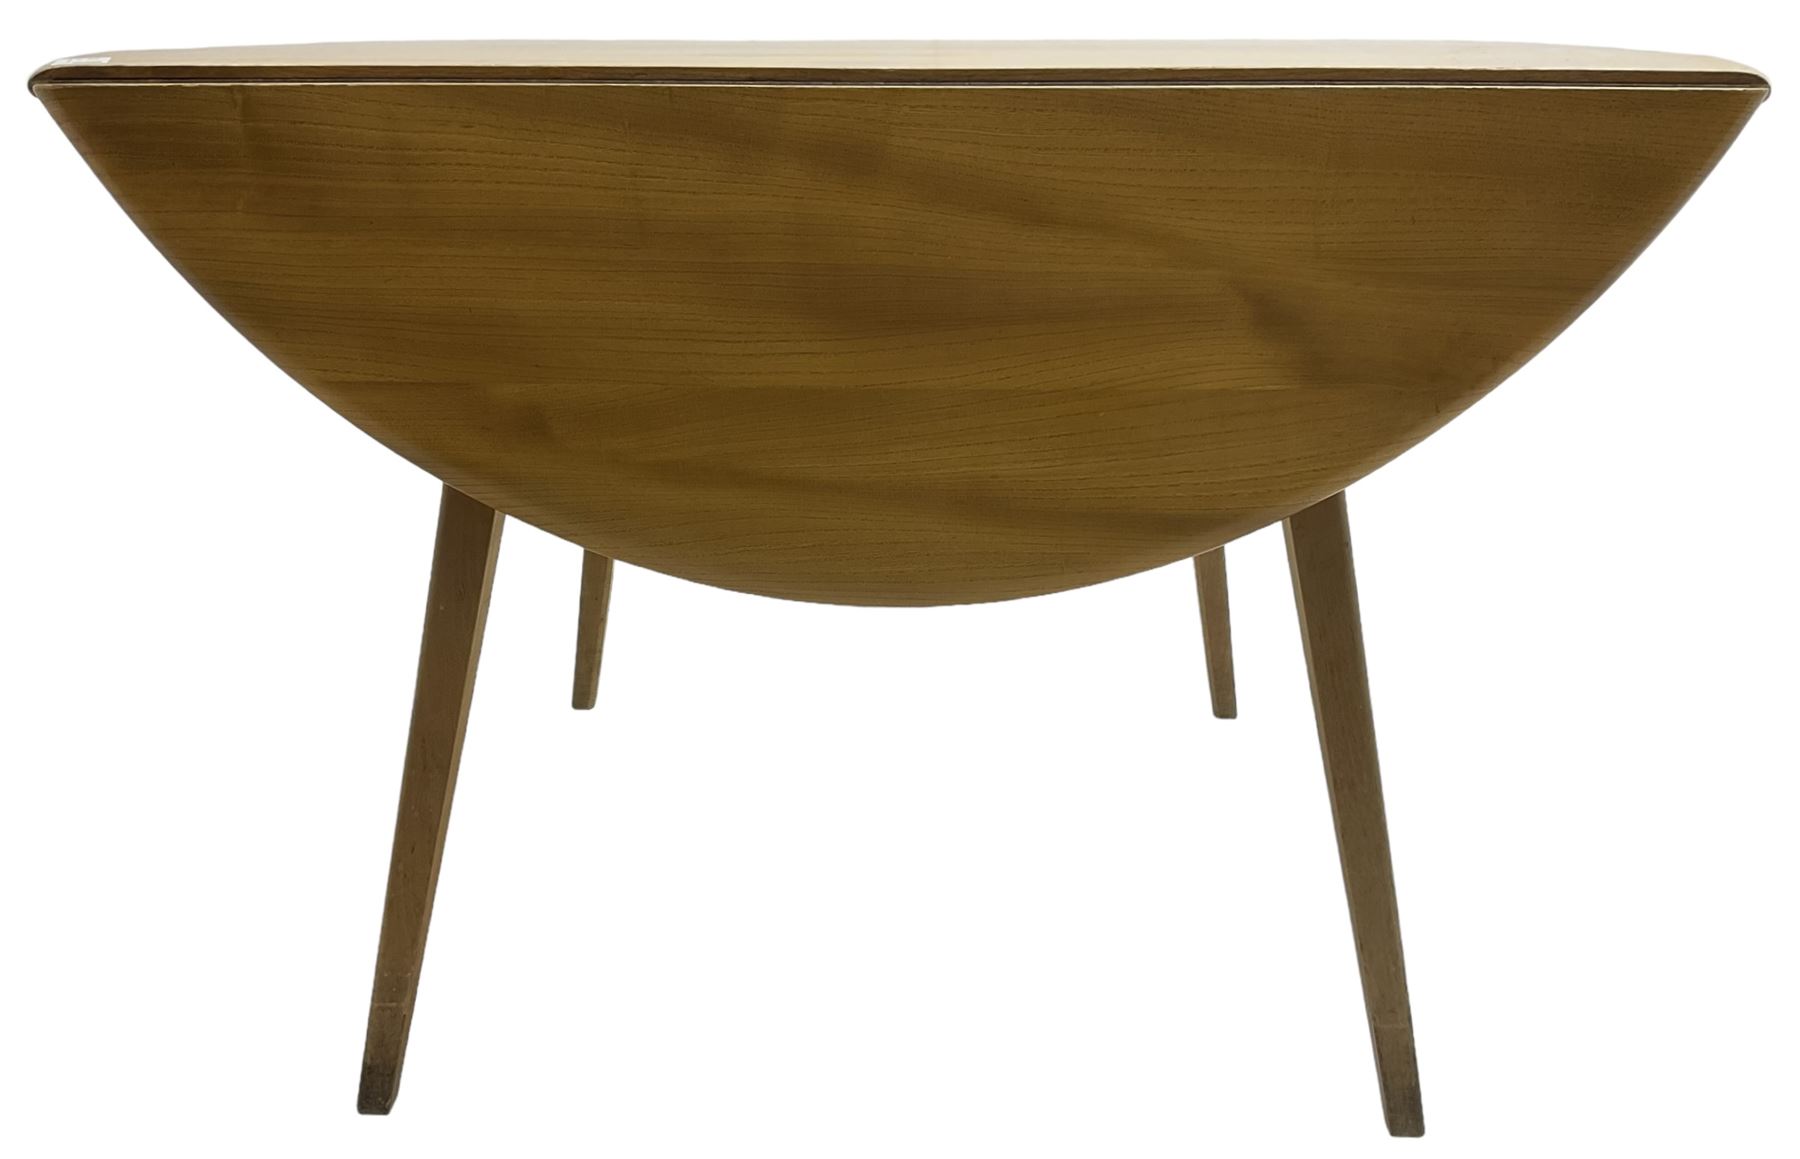 Ercol - mid-20th century golden elm drop-leaf dining table - Image 6 of 6